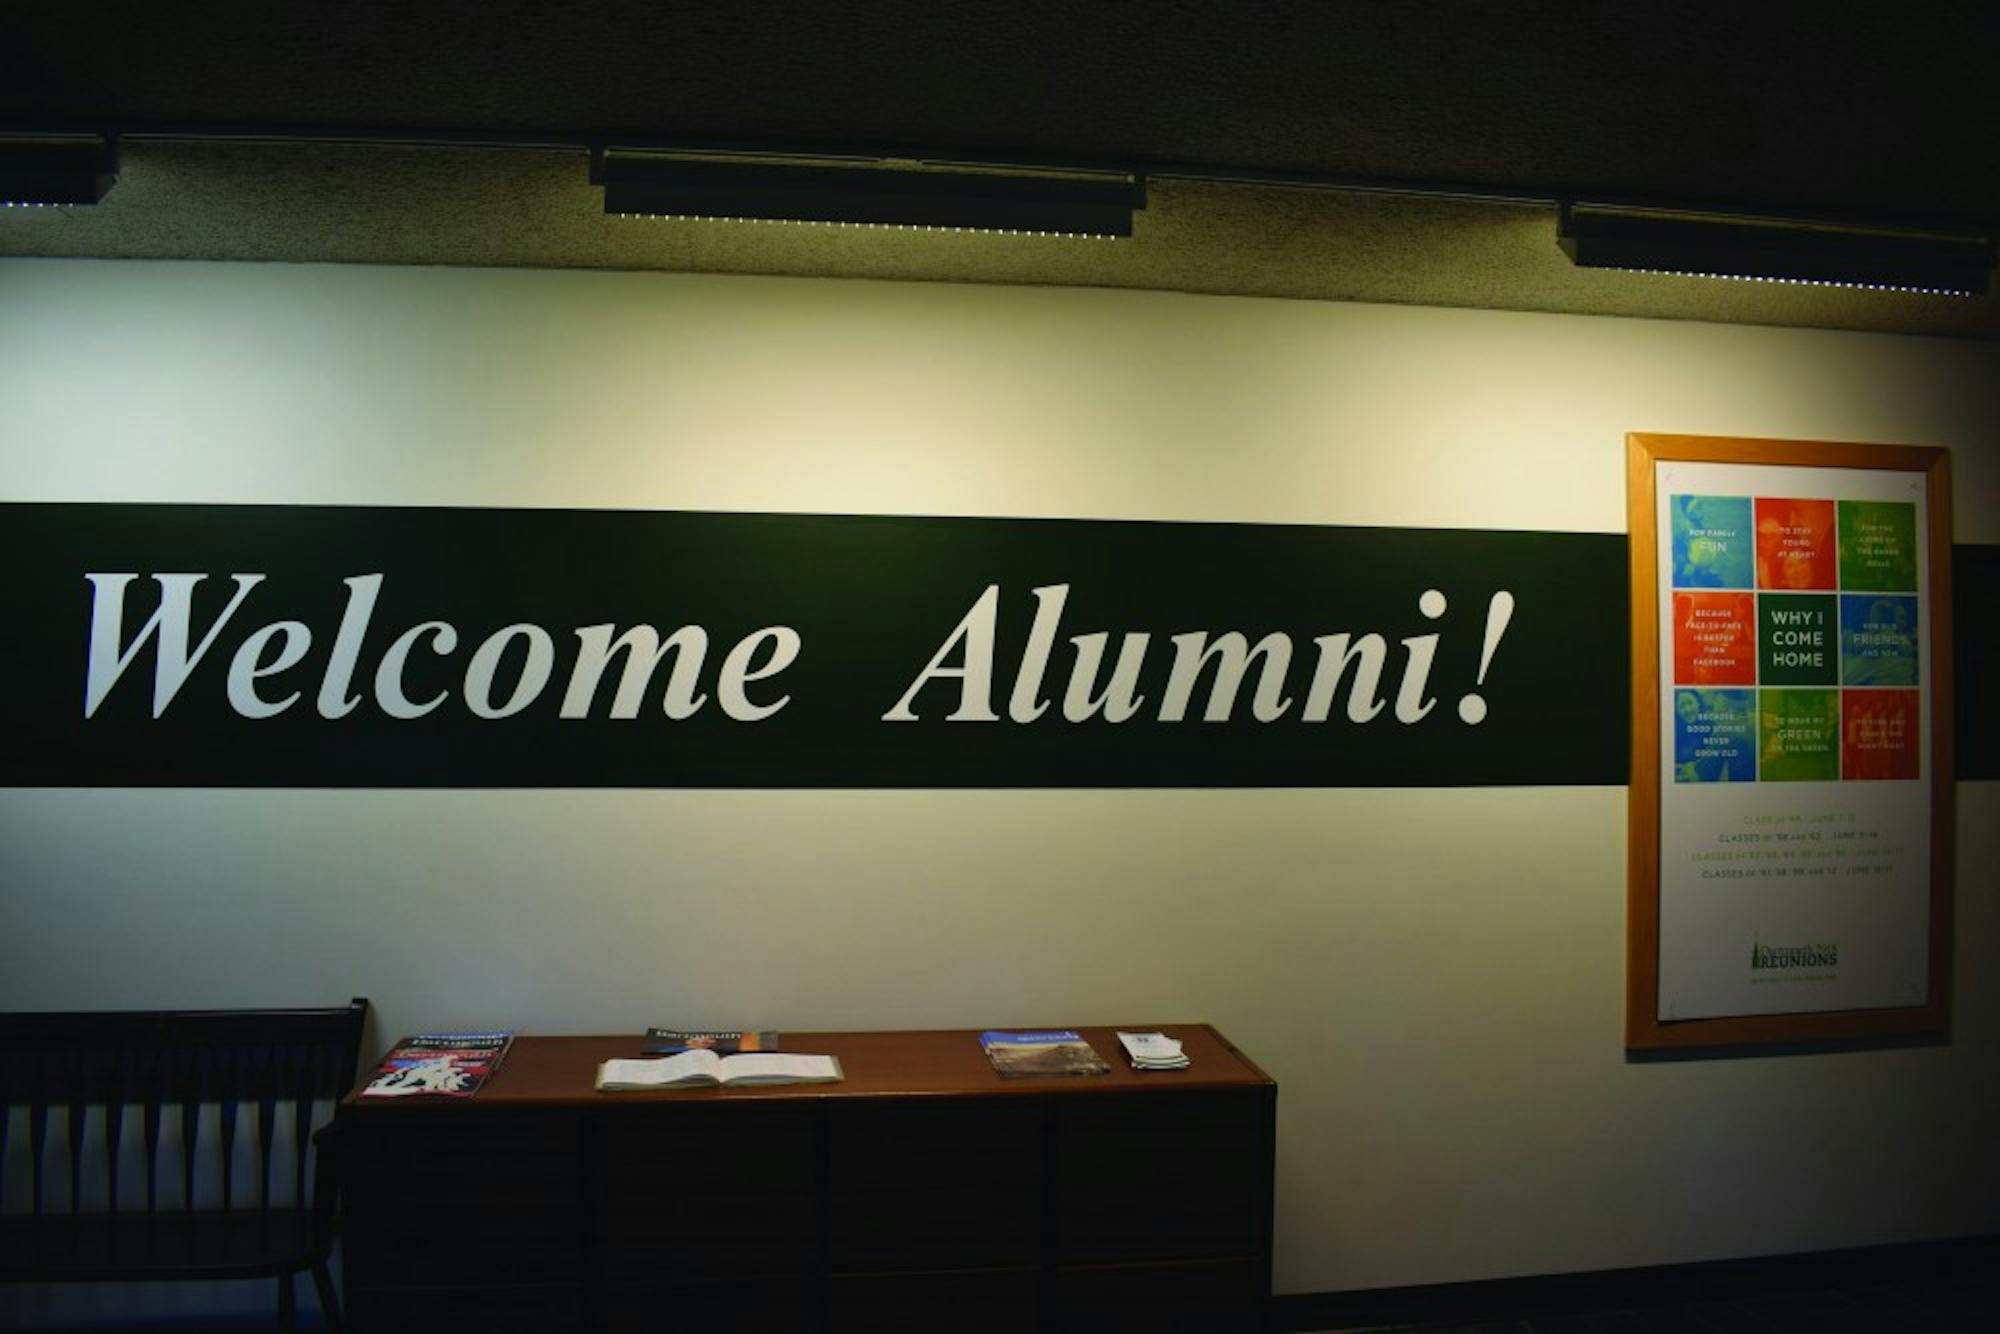 If they haven’t already, members of the Class of 2018 may soon become very familiar with the Blunt Alumni Center.